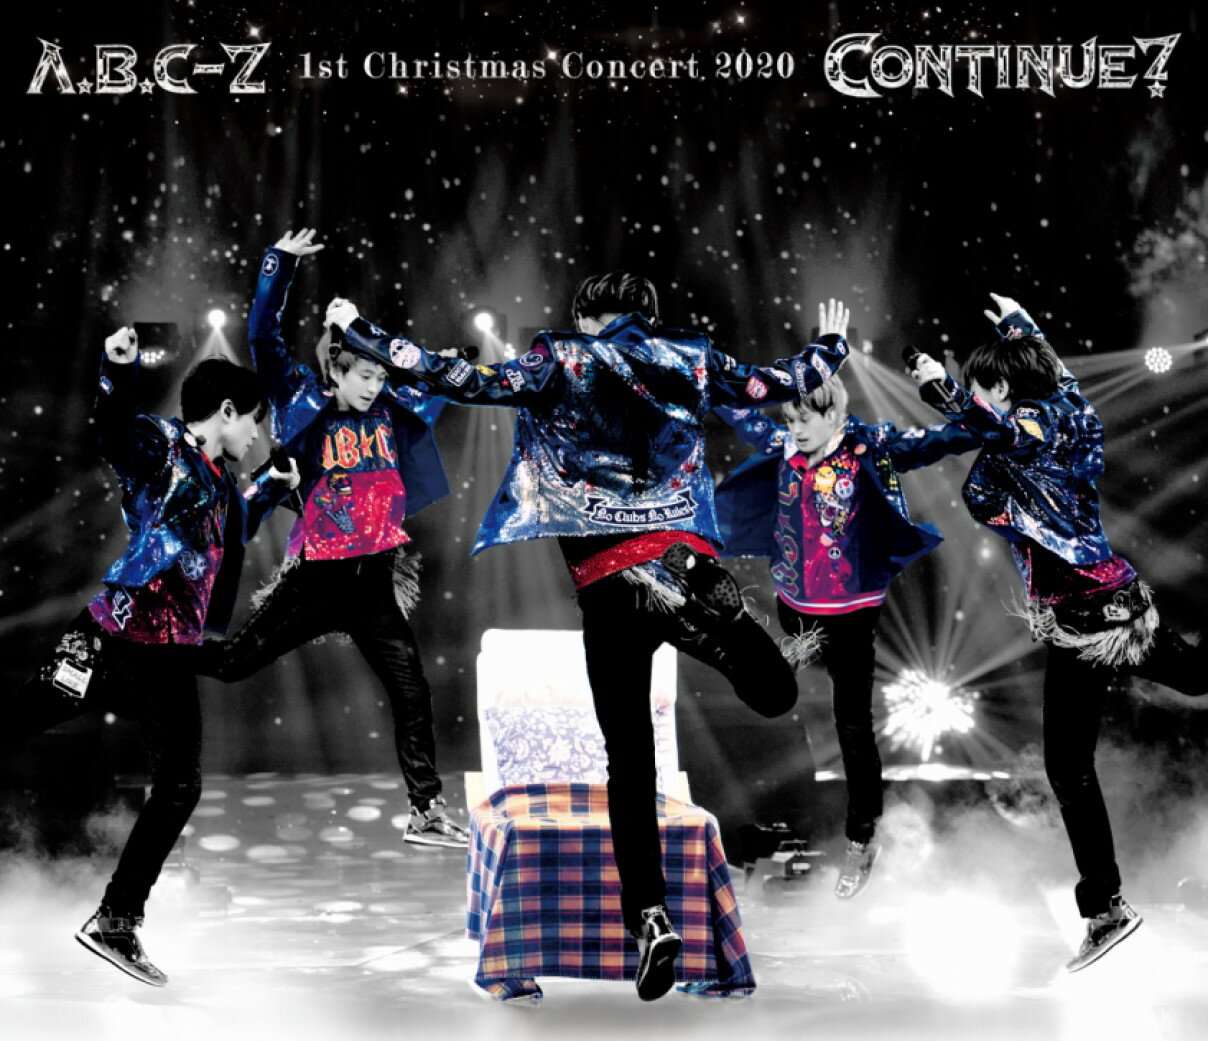 A.B.C-Z 1st Christmas Concert 2020 CONTINUE?(通常盤 Blu-ray) 